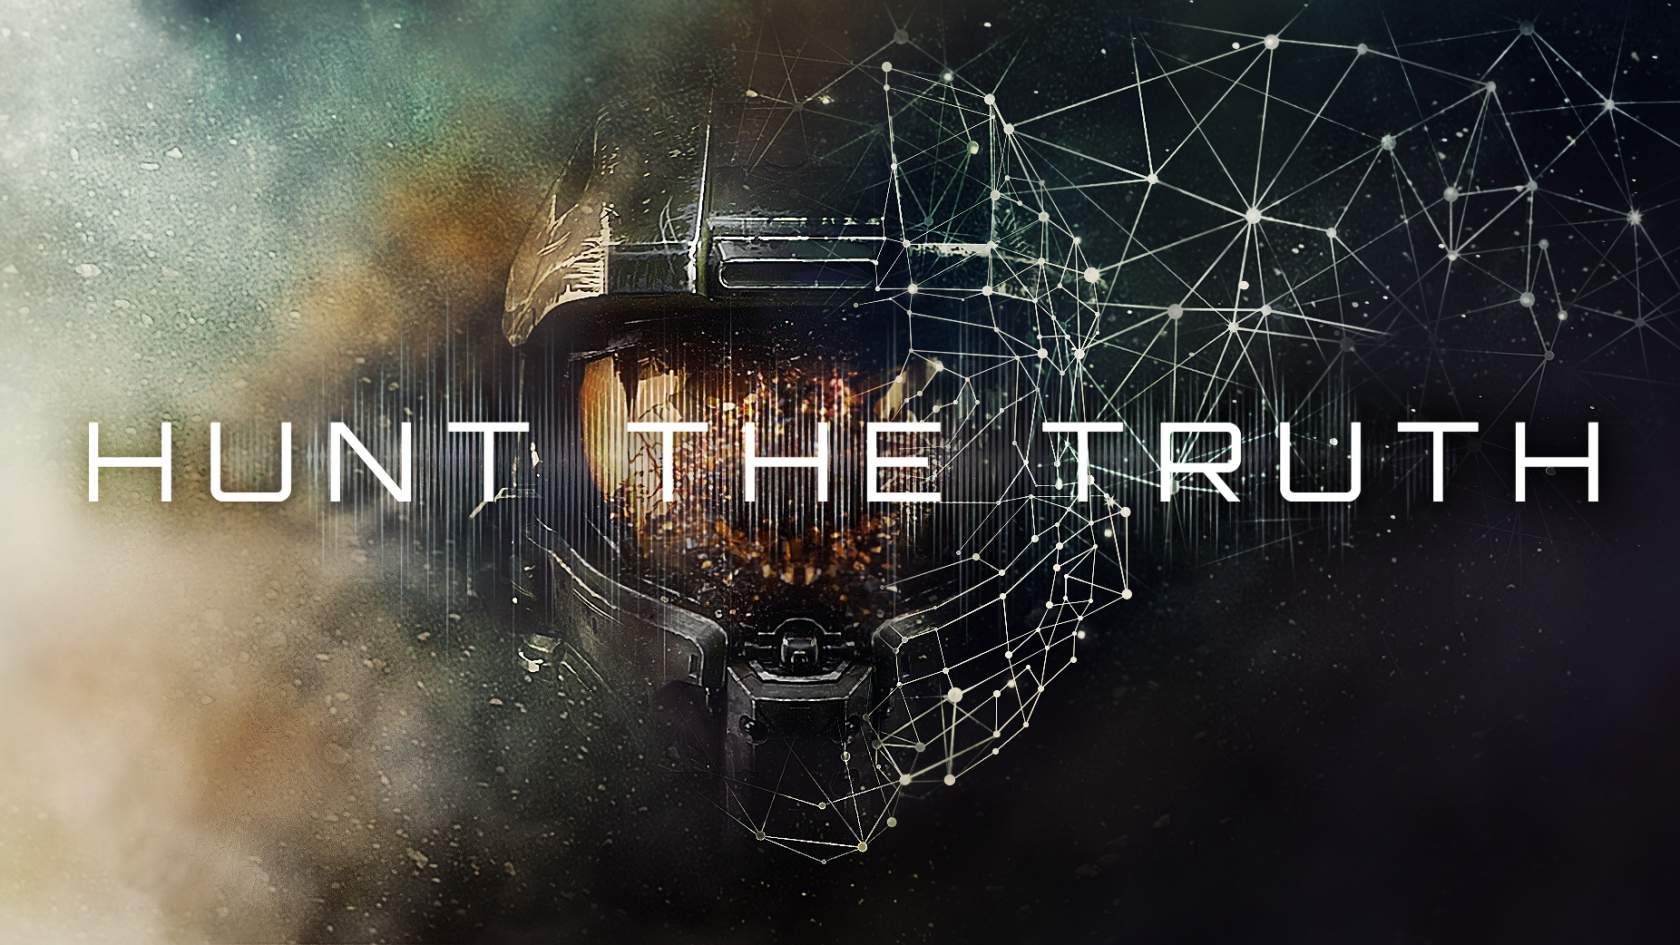 halo-hunt-the-truth-2